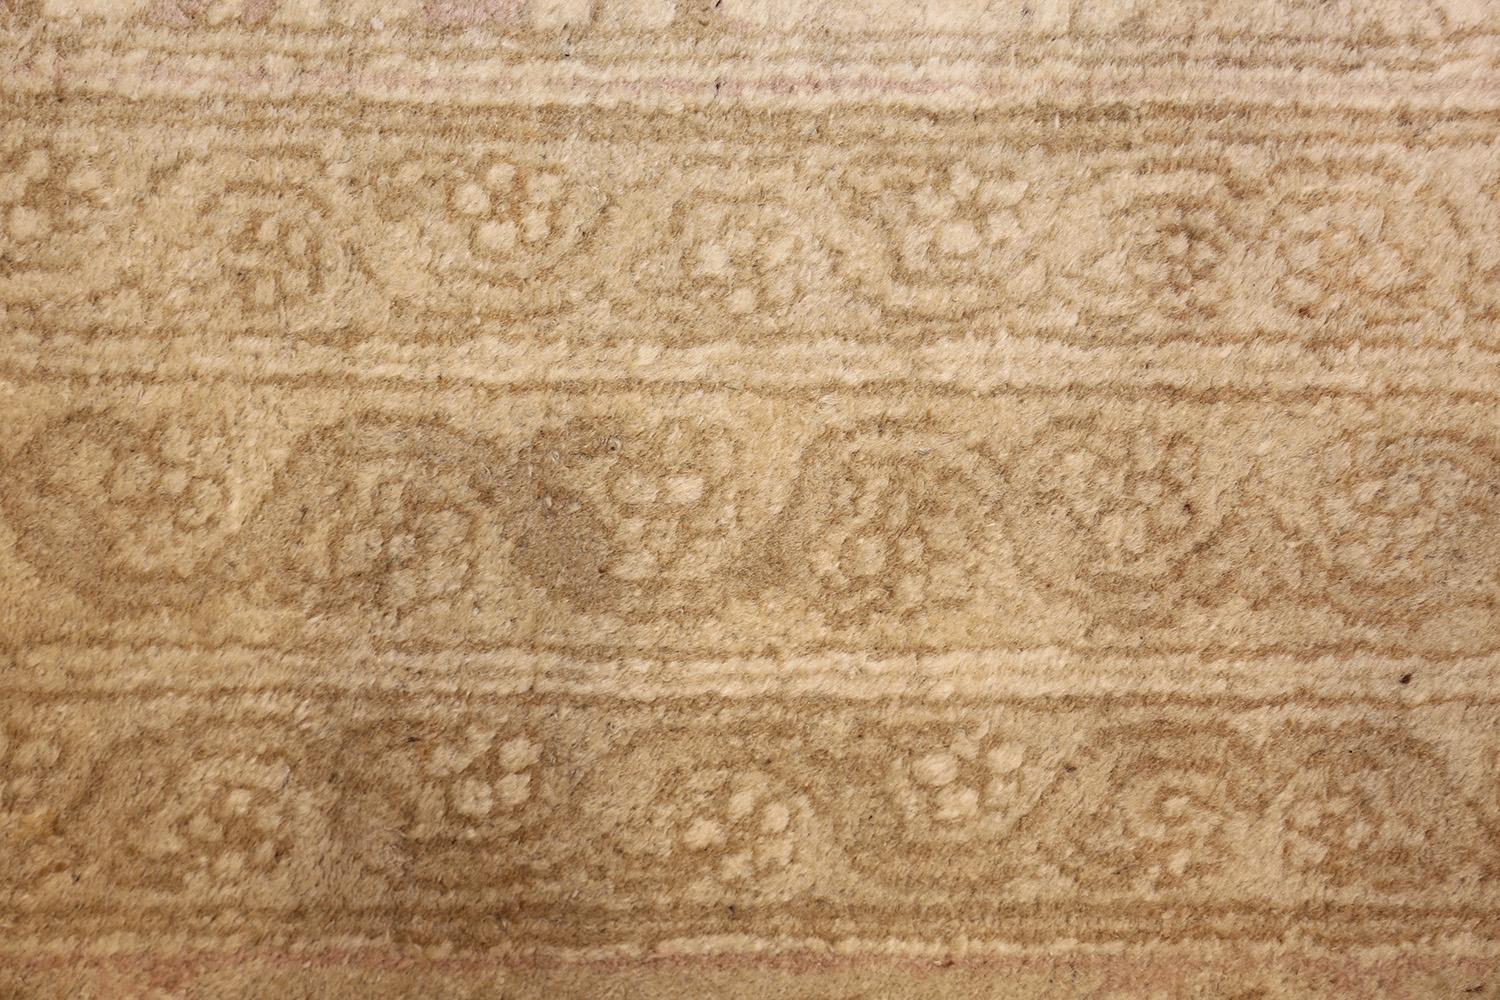 Wool Antique Indian Agra Carpet. Size: 12 ft x 13 ft 10 in For Sale